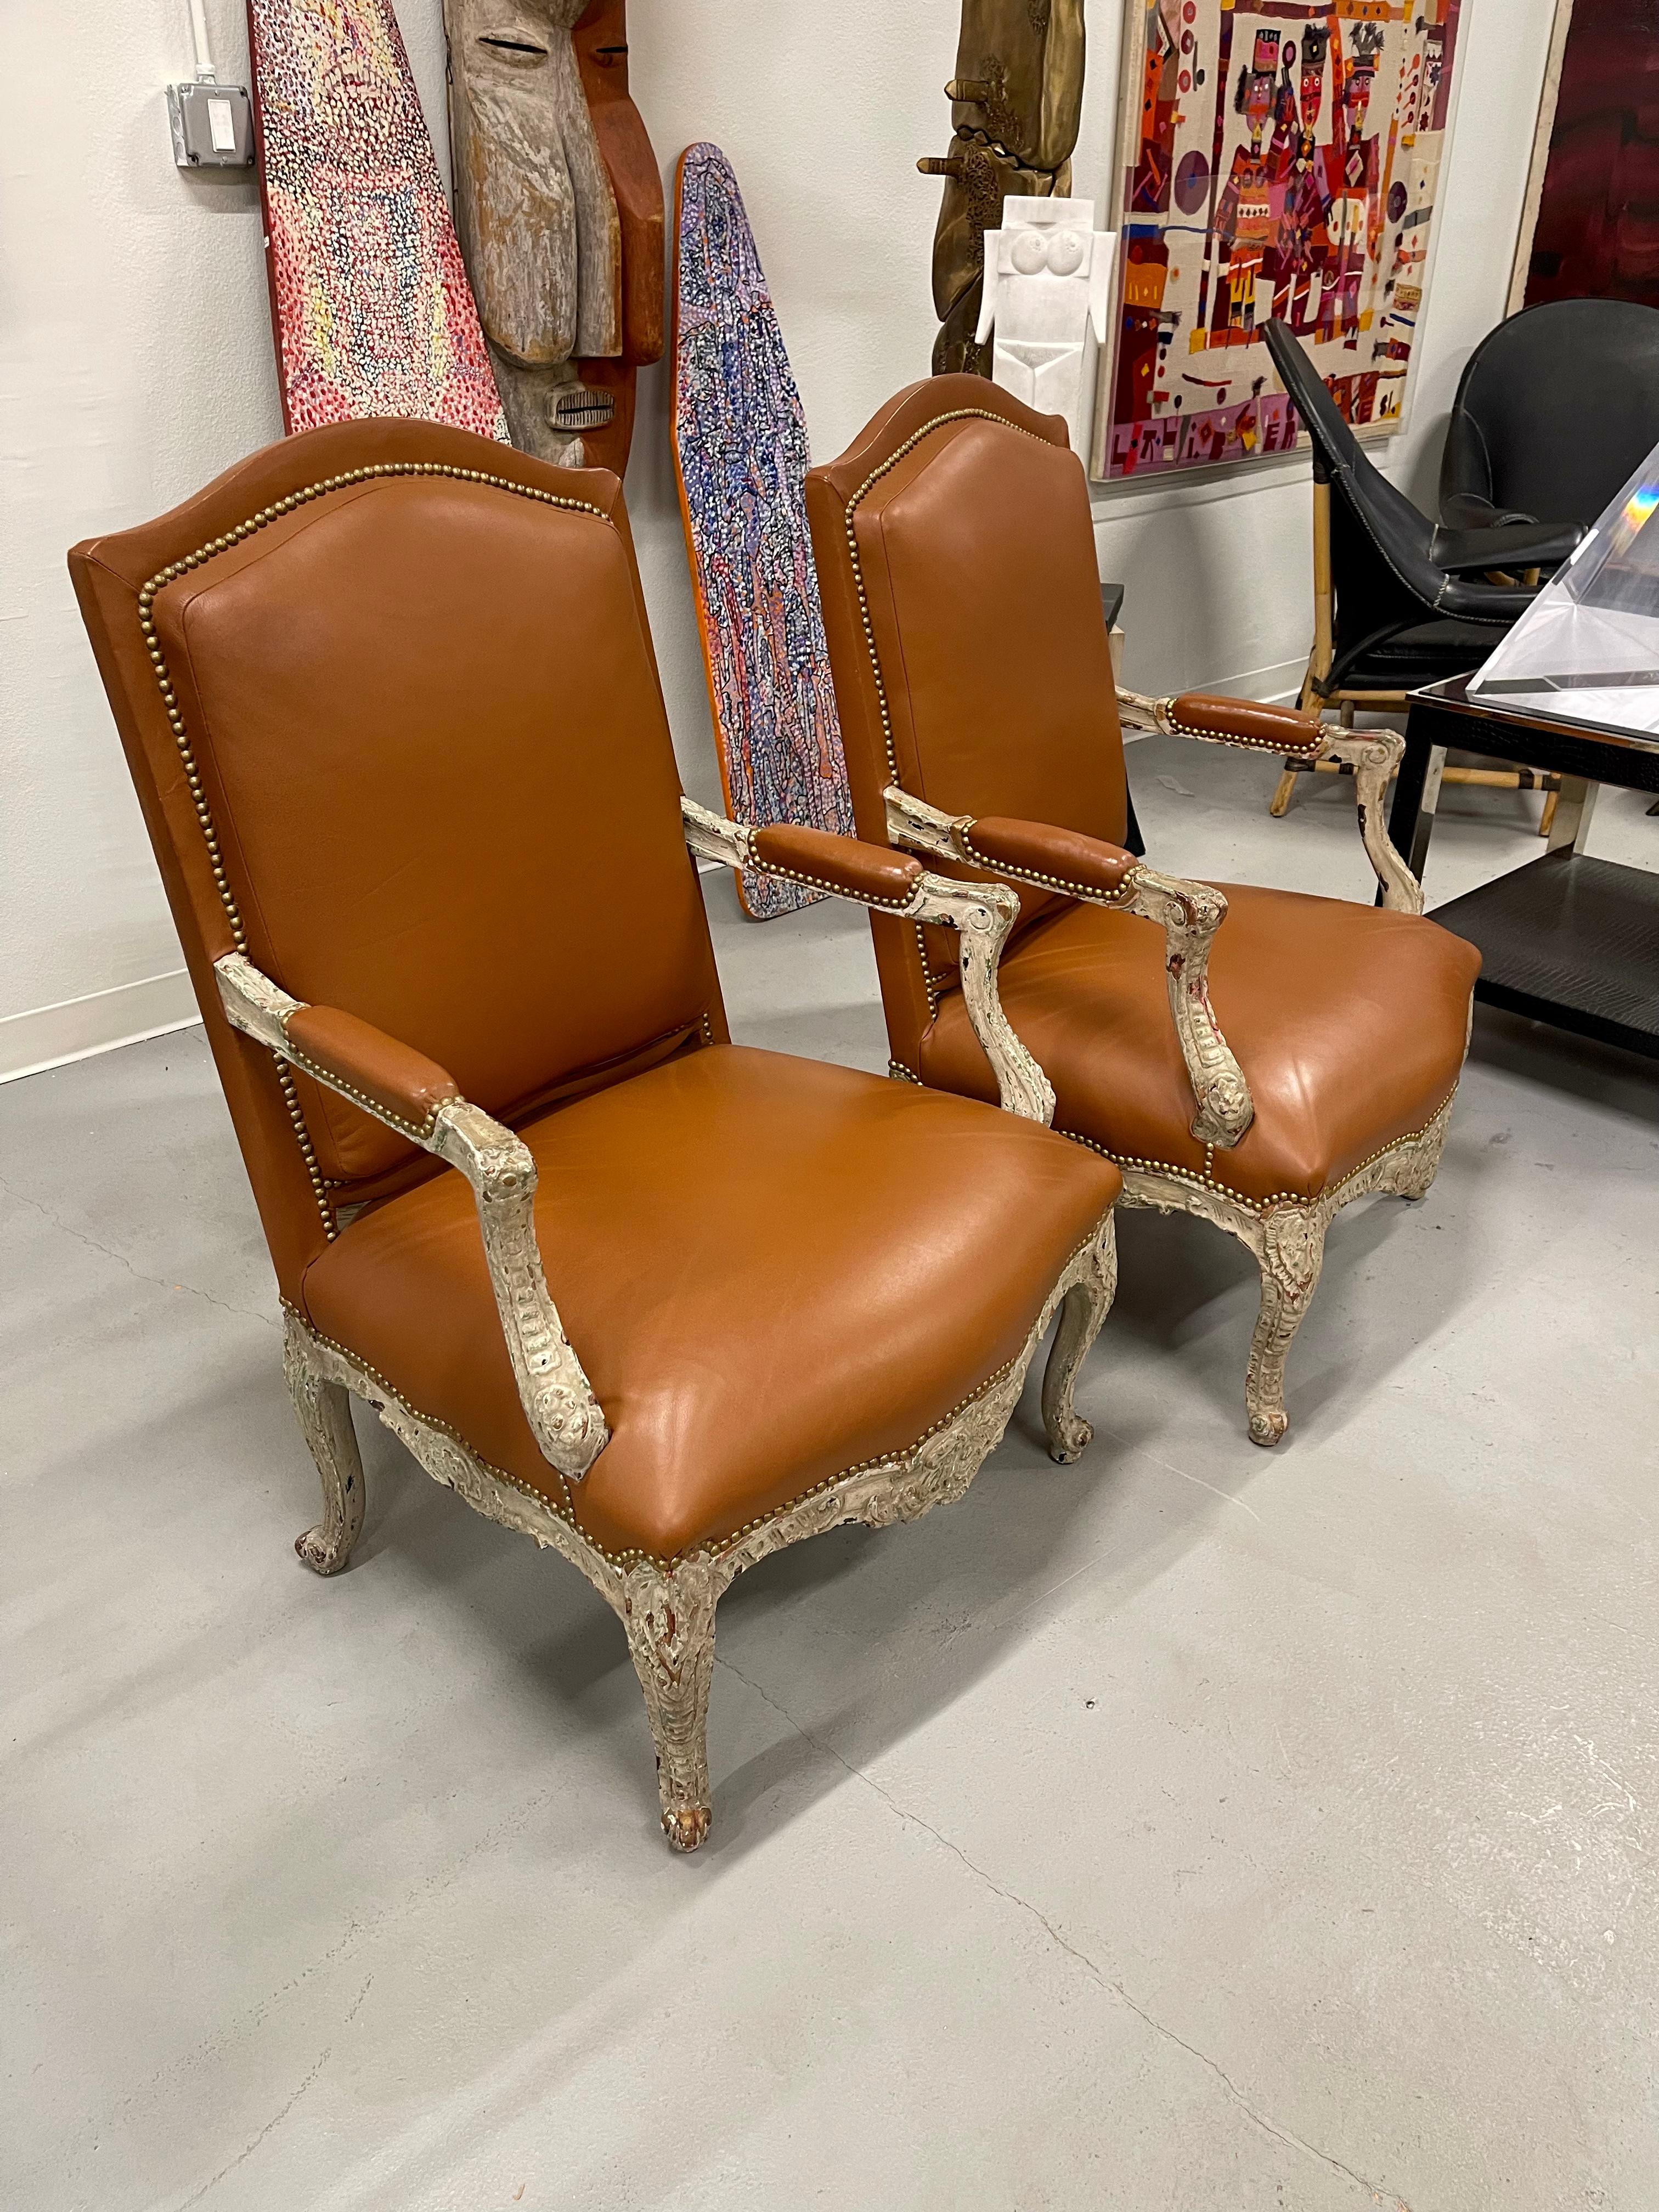 A beautiful pair of 19th century Louis XV Bergeres upholstered in Leather and woven grasscloth. The painted surfaces have quite a few layers of chippy paint, which looks wonderful. The nailhead detail is nice. The leather is in excellent condition.